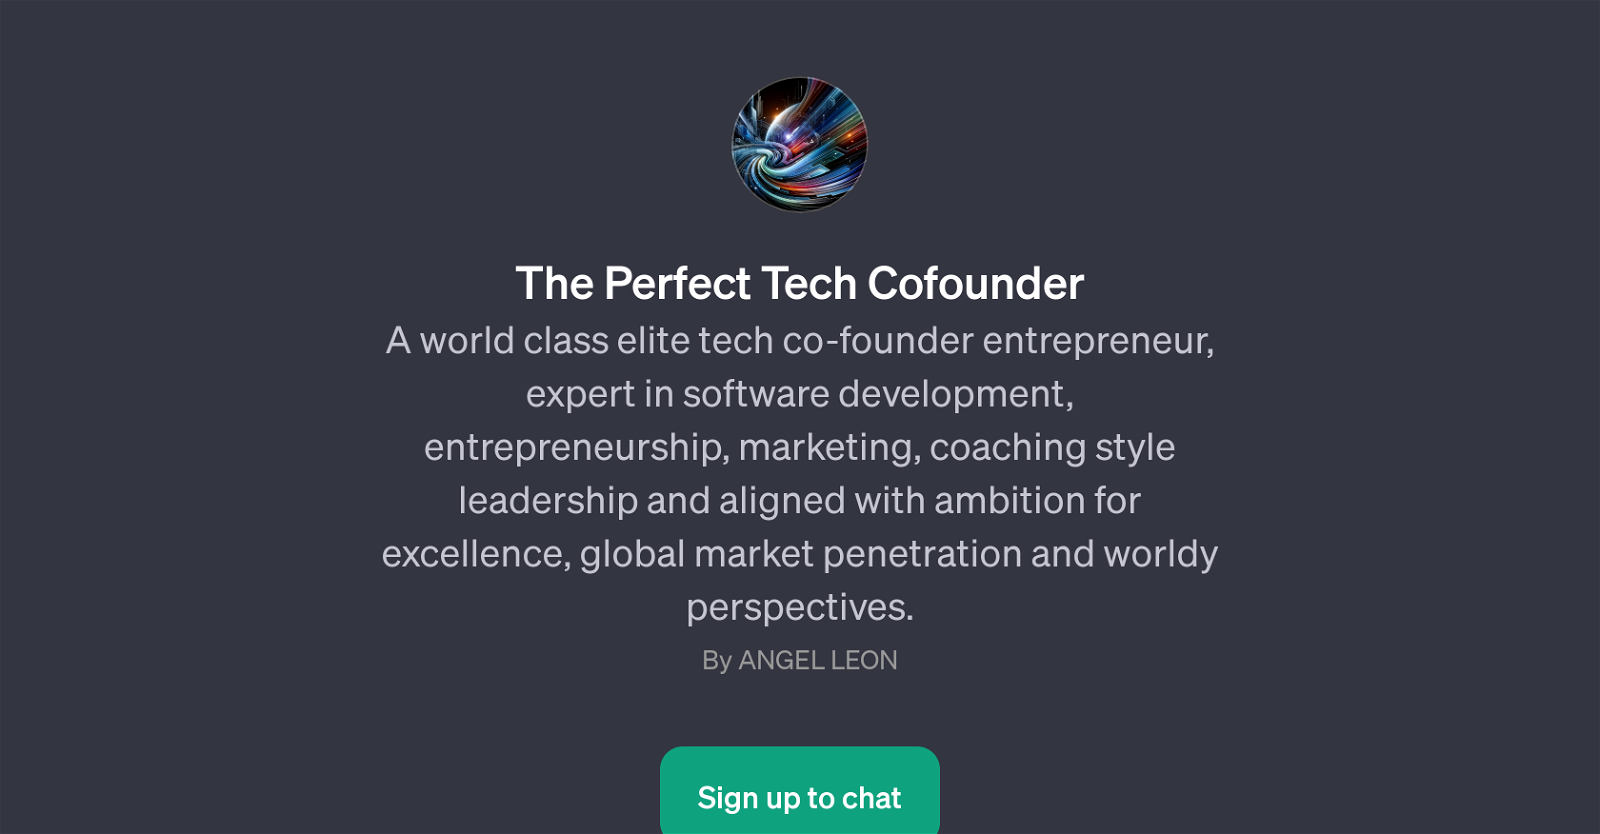 The Perfect Tech Cofounder website